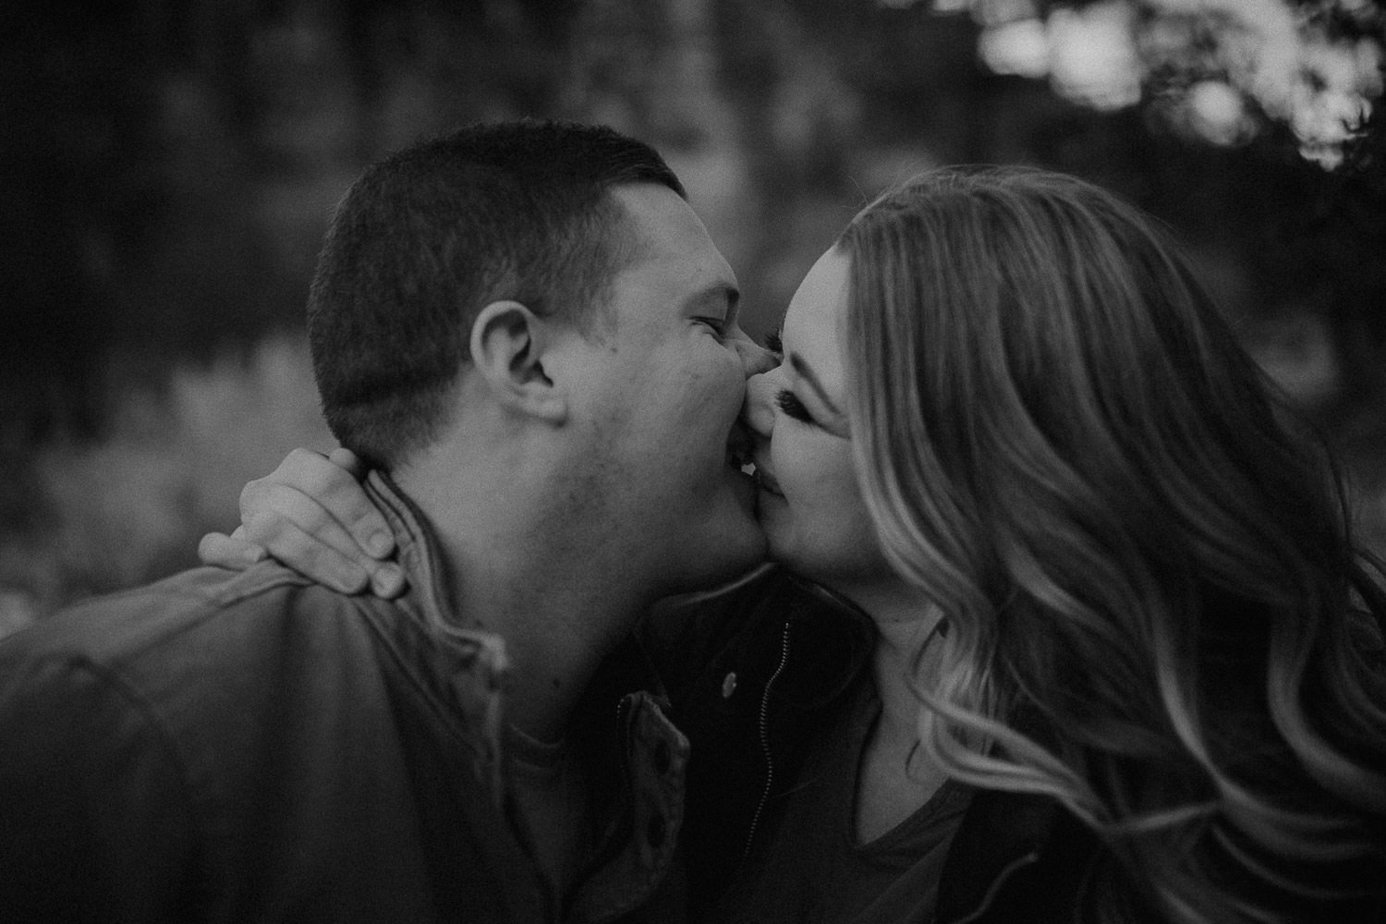 Couple laughs and kisses each other in this black and white image.